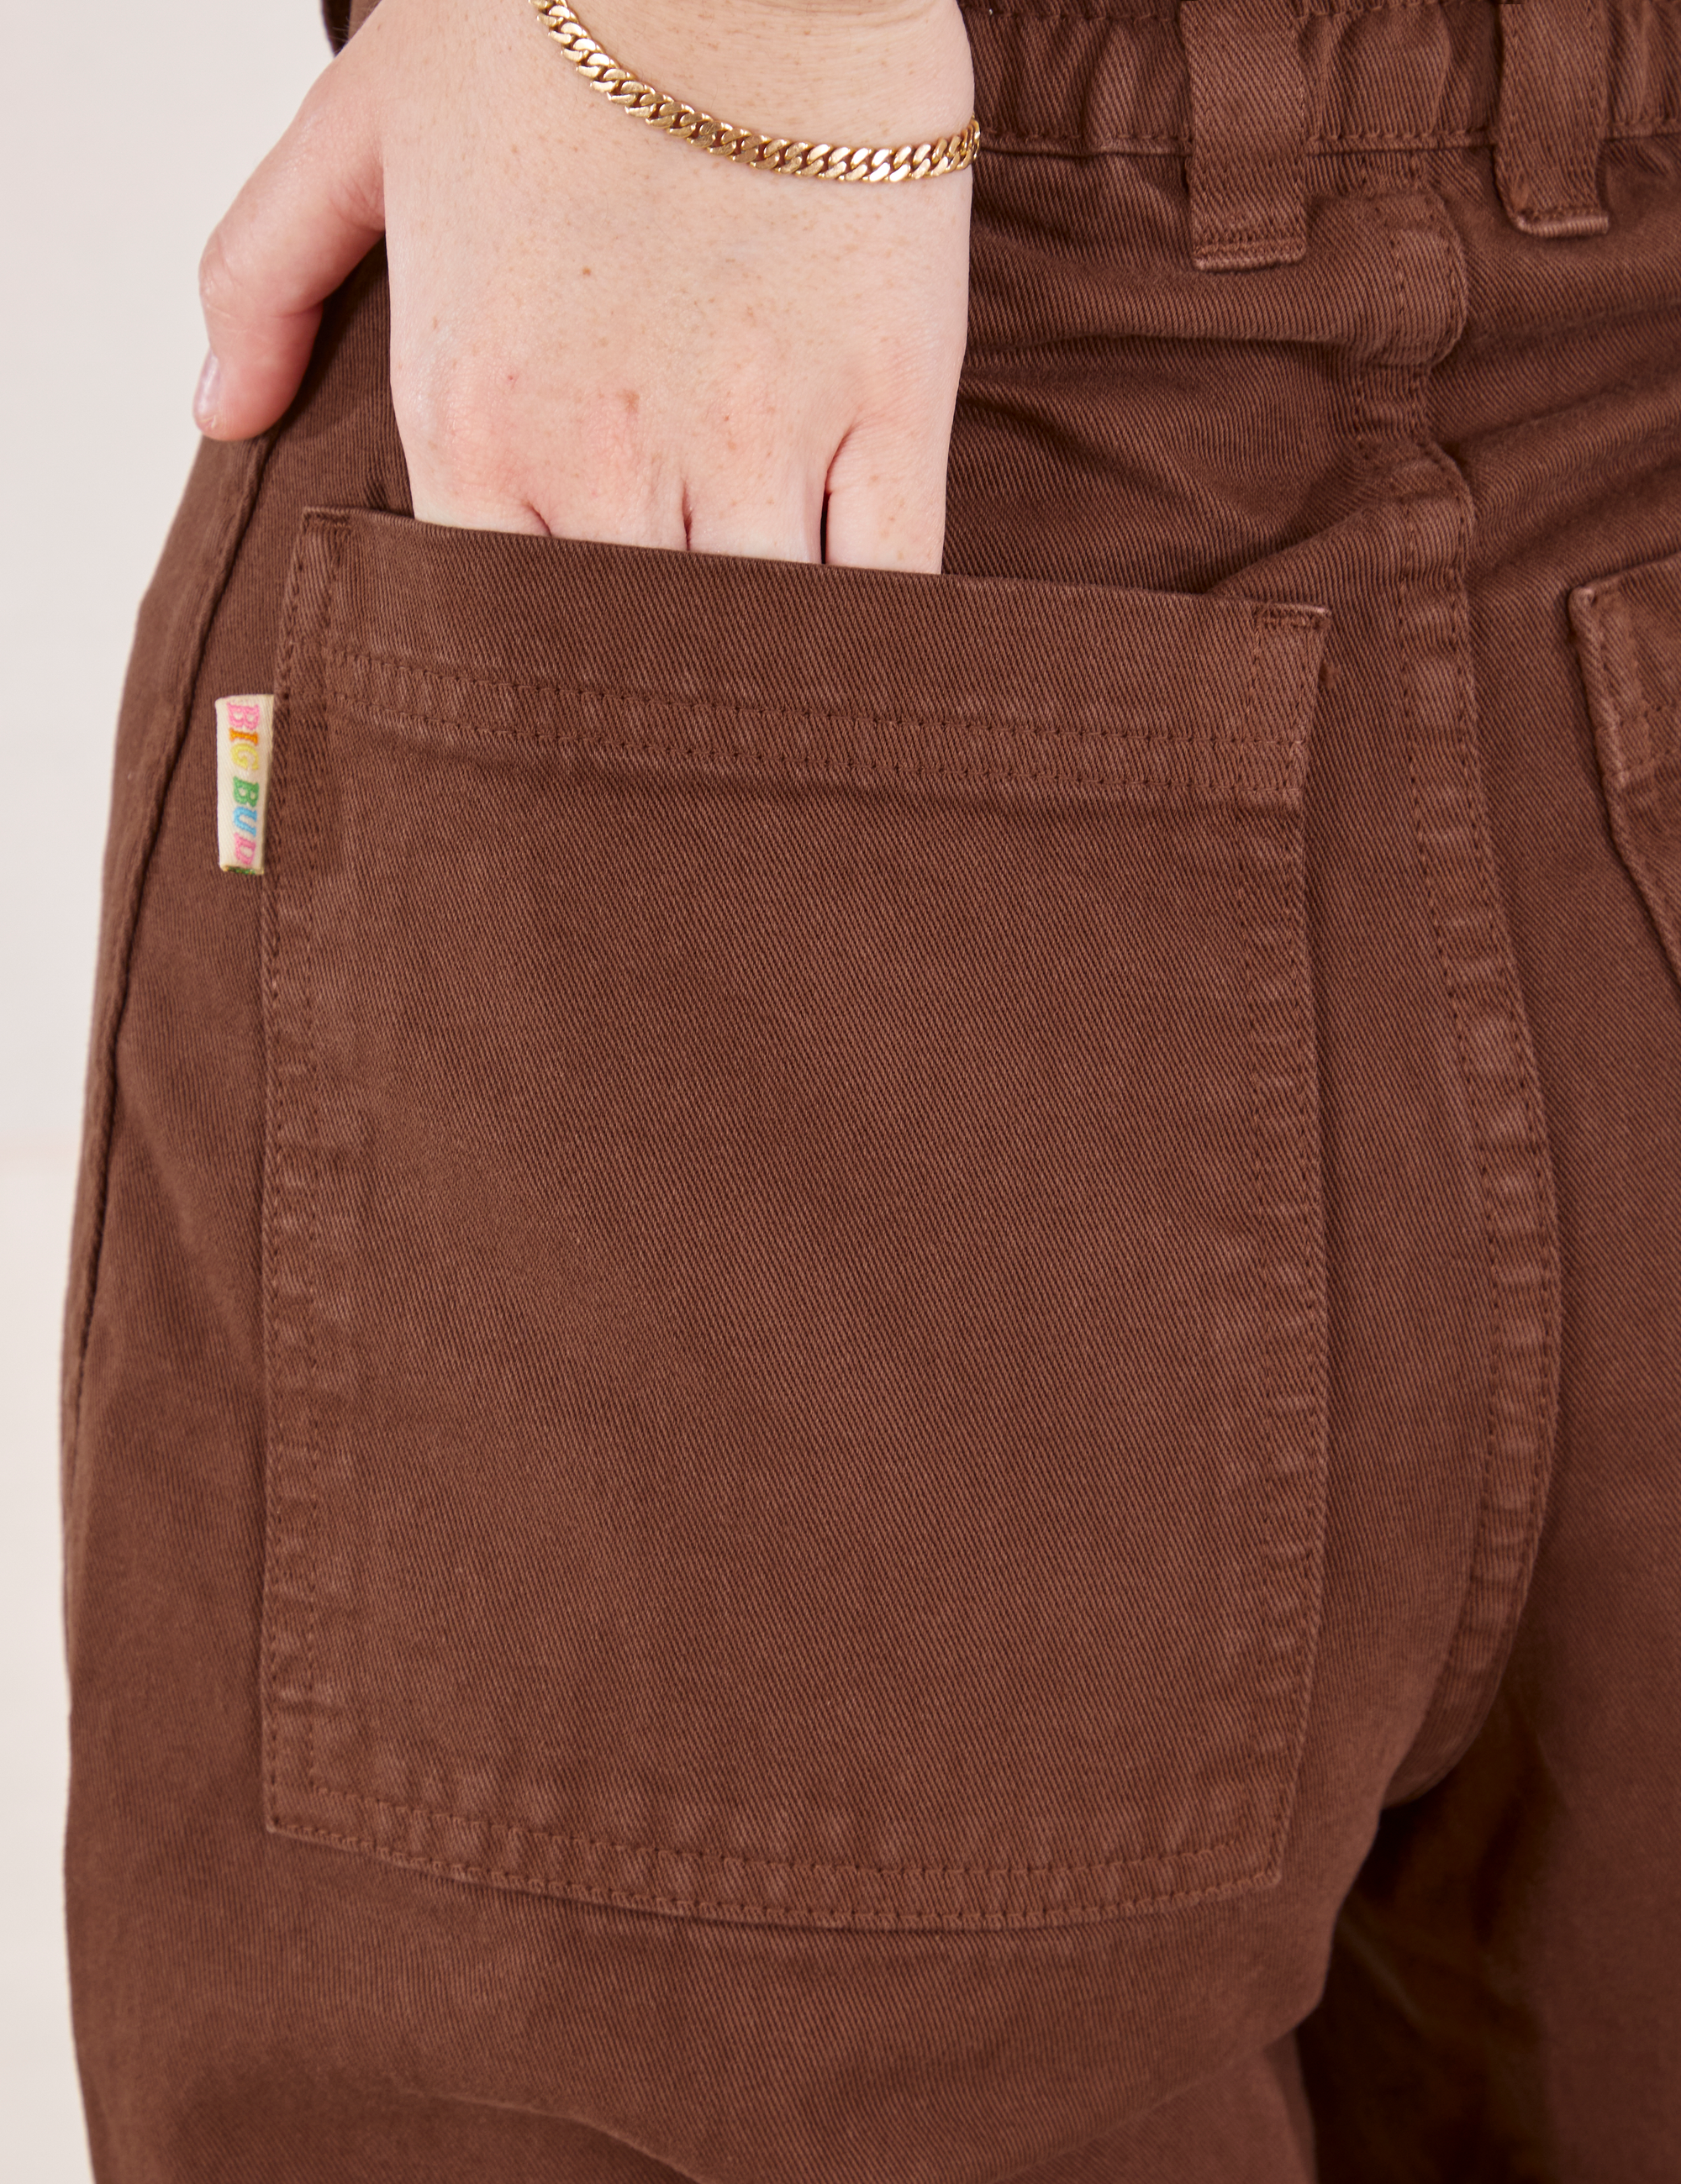 Petite Bell Bottoms in Fudgesicle Brown back pocket close up. Hana has her hand in the pocket.